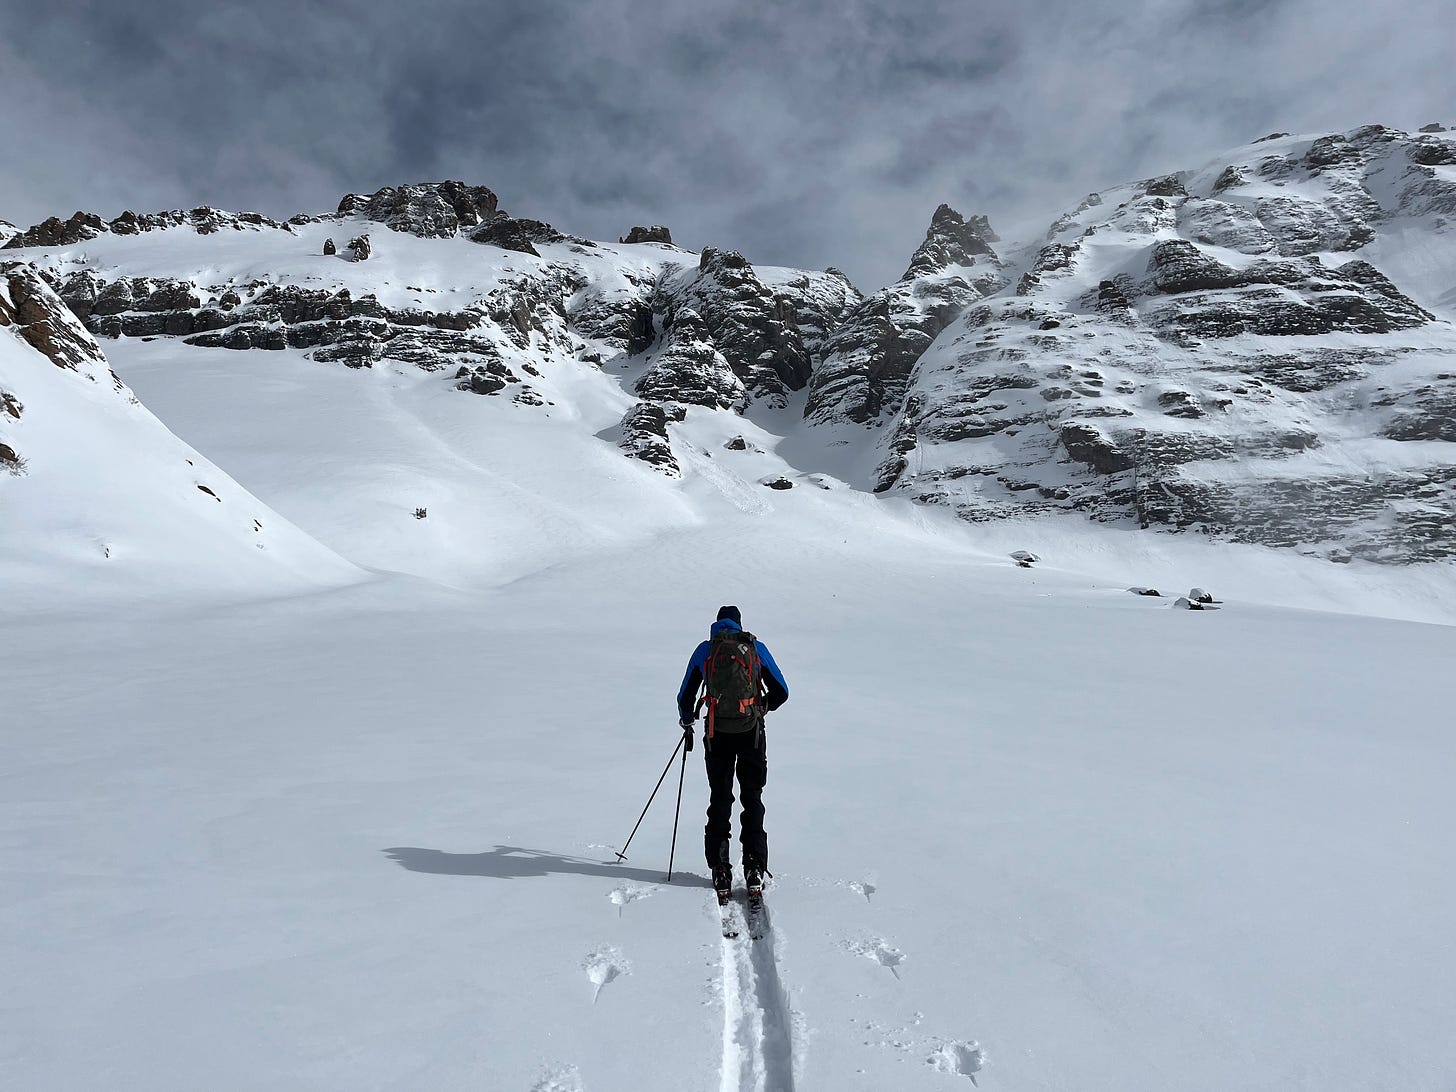 A man skiing uphill into snow covered mountains